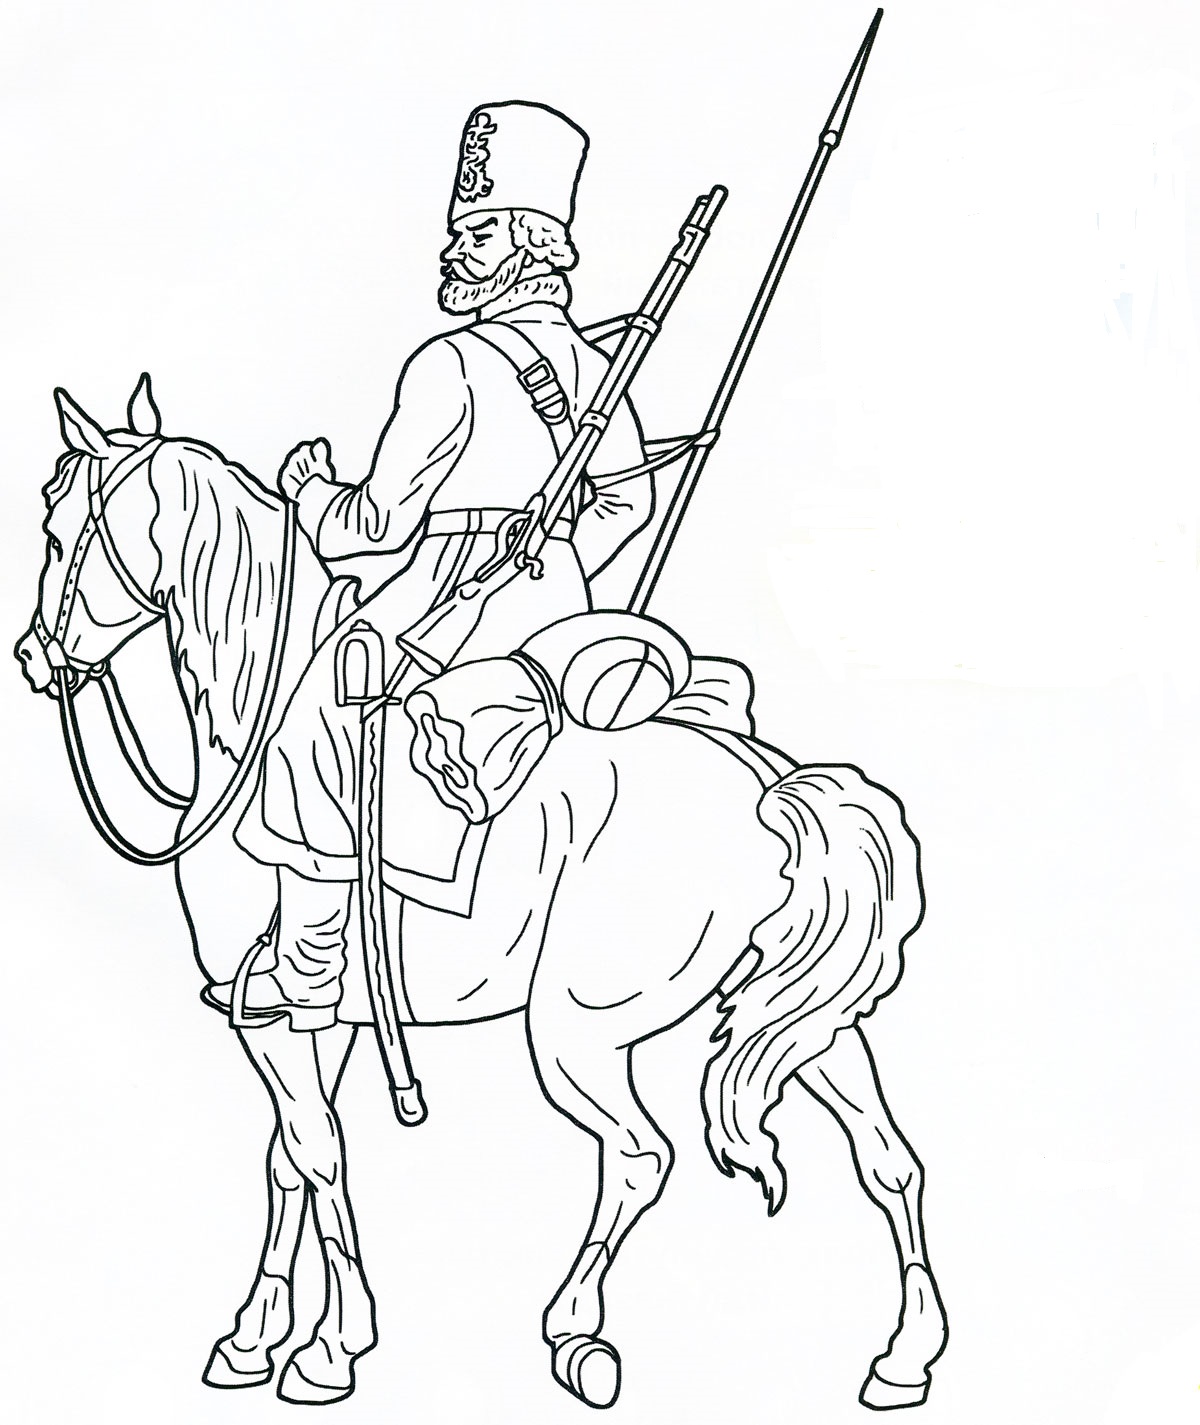 Cossack riding a horse